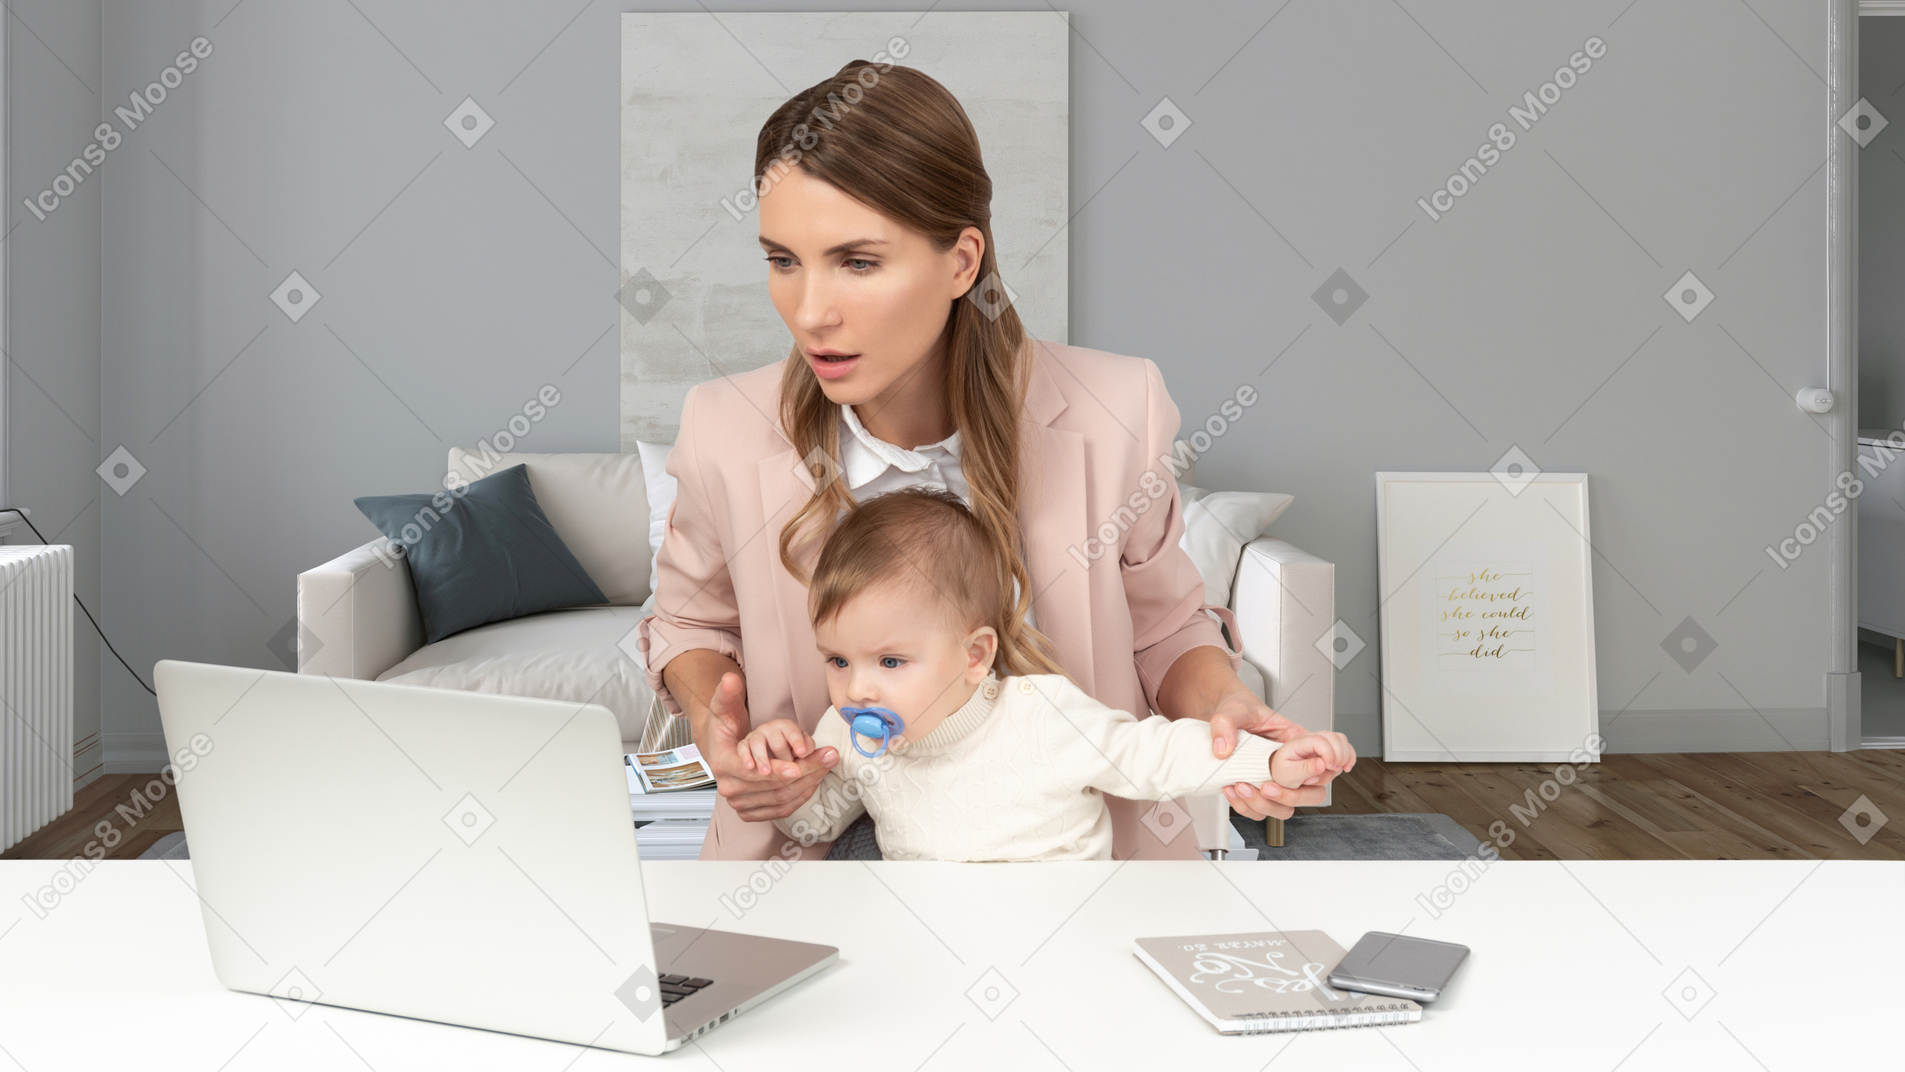 Young woman sitting at a desk with a laptop